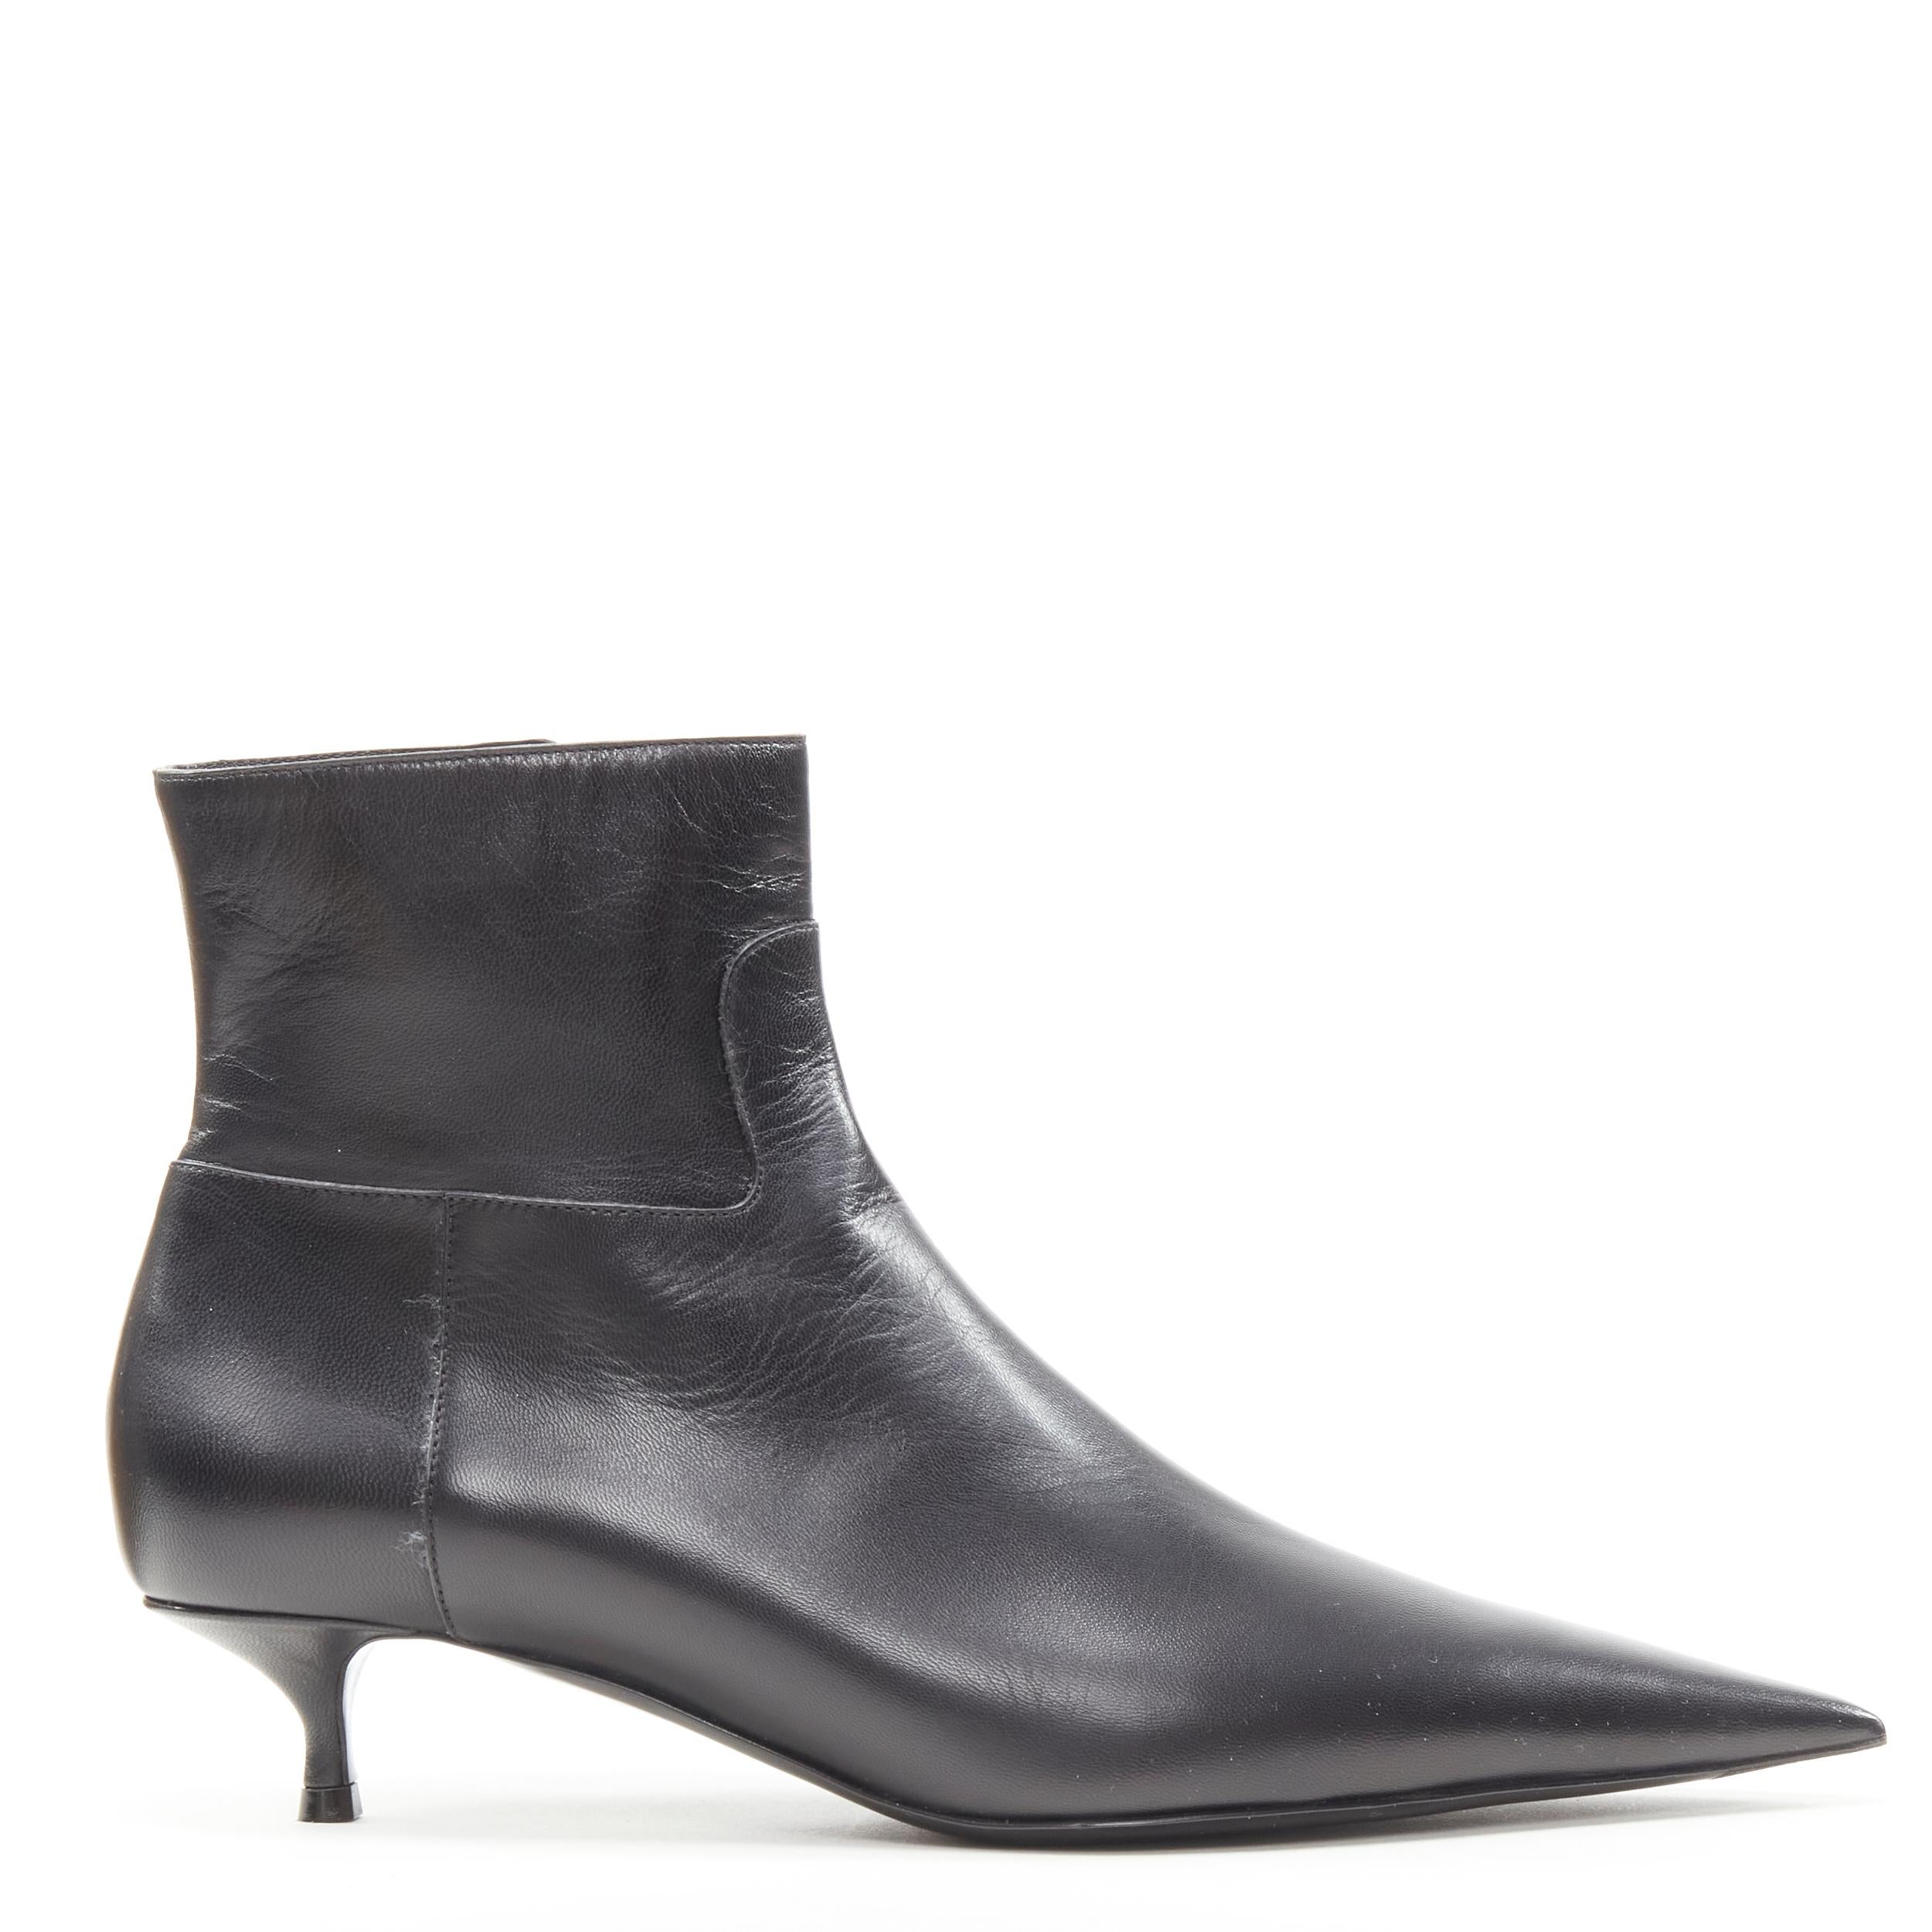 new BALENCIAGA Knife black calfskin leather kitten heel bootie EU37.5 US7.5 
Reference: TGAS/B02245 
Brand: Balenciaga 
Designer: Demna 
Color: Black 
Pattern: Solid 
Closure: Zip 
Extra Detail: Extra pointy Knife silhouette. Kitten heel. 
Made in: